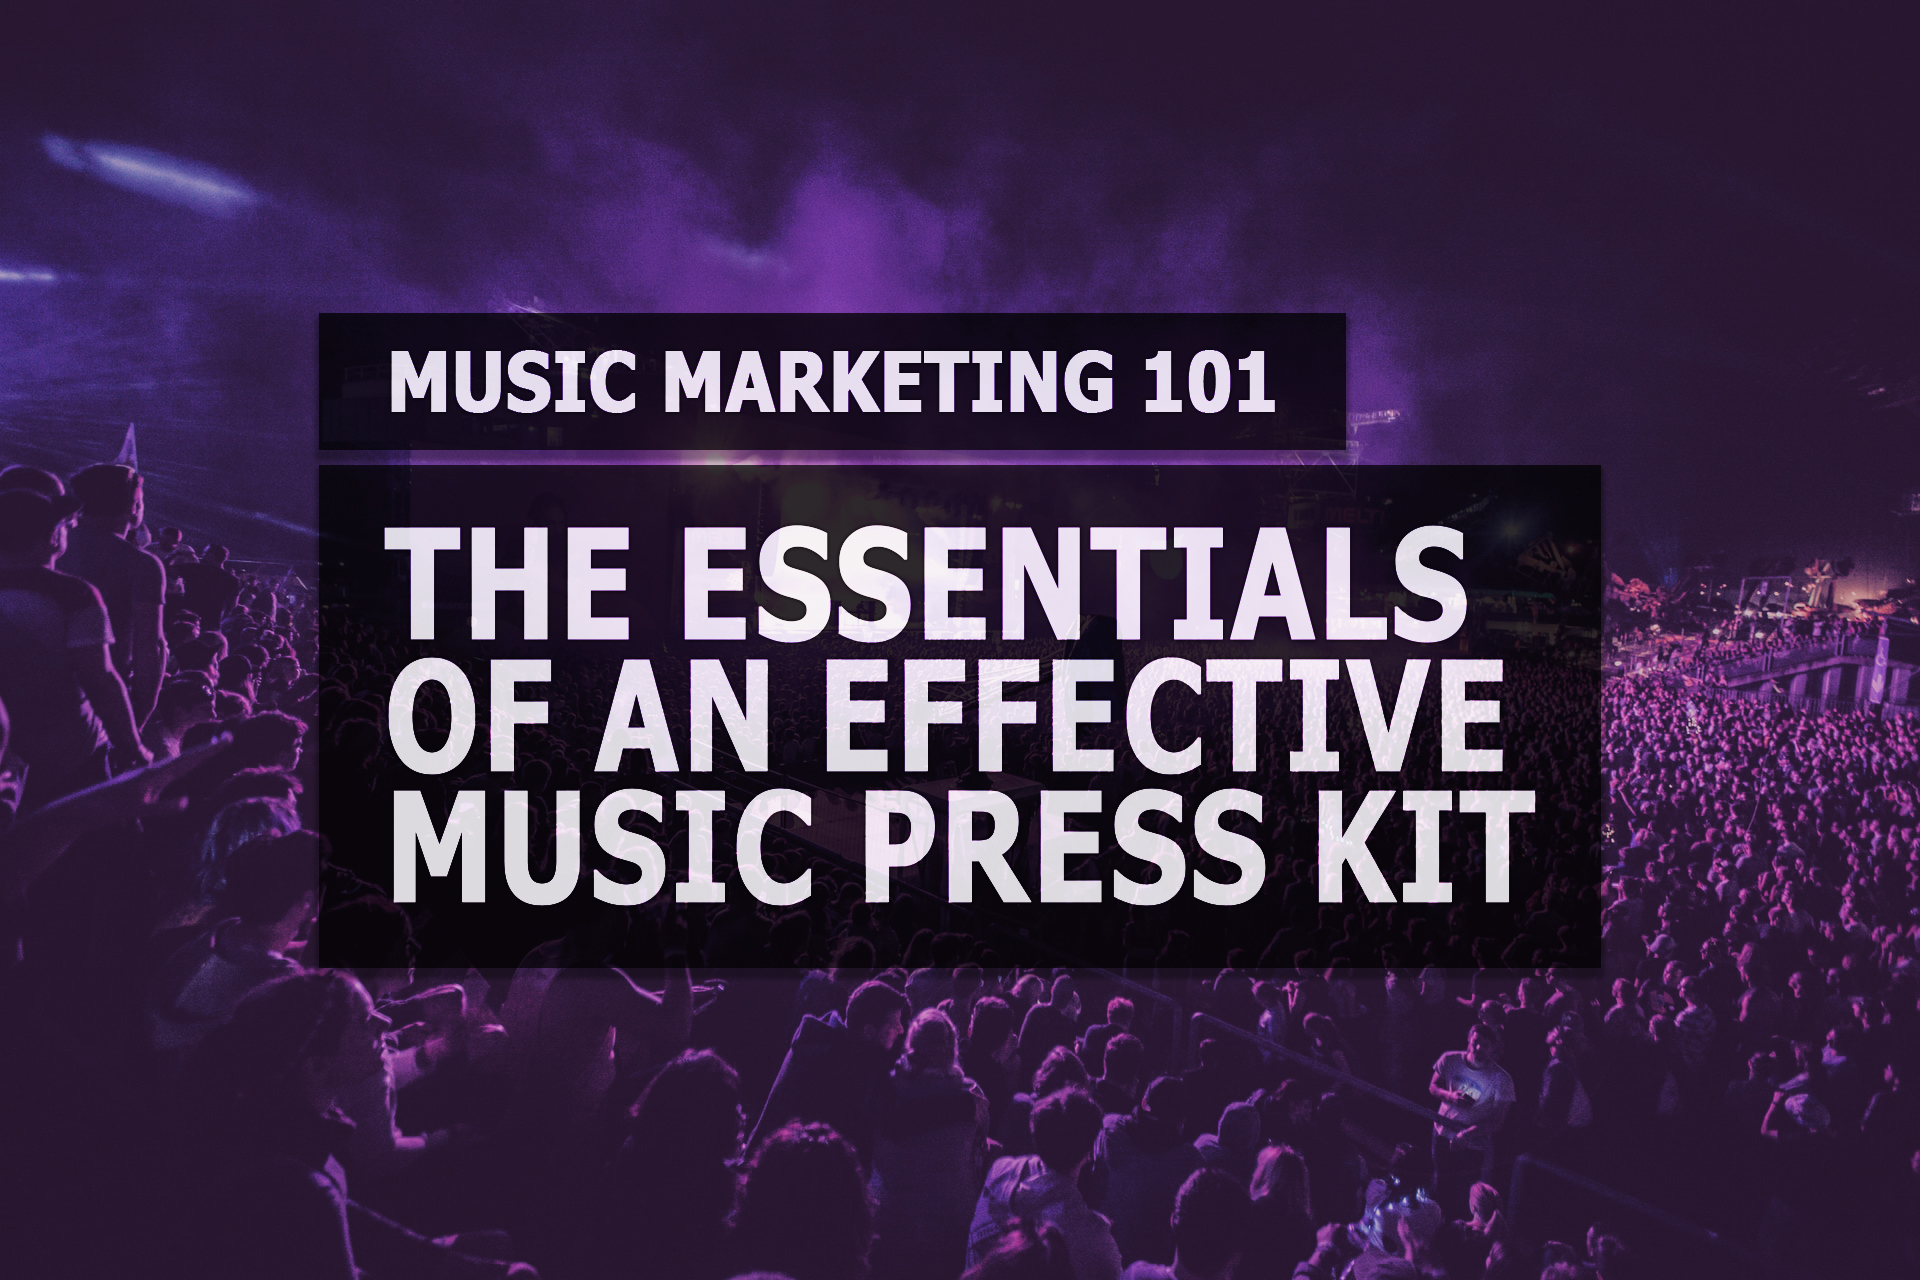 Music Press Kit – What Is It & What Does It Contain?